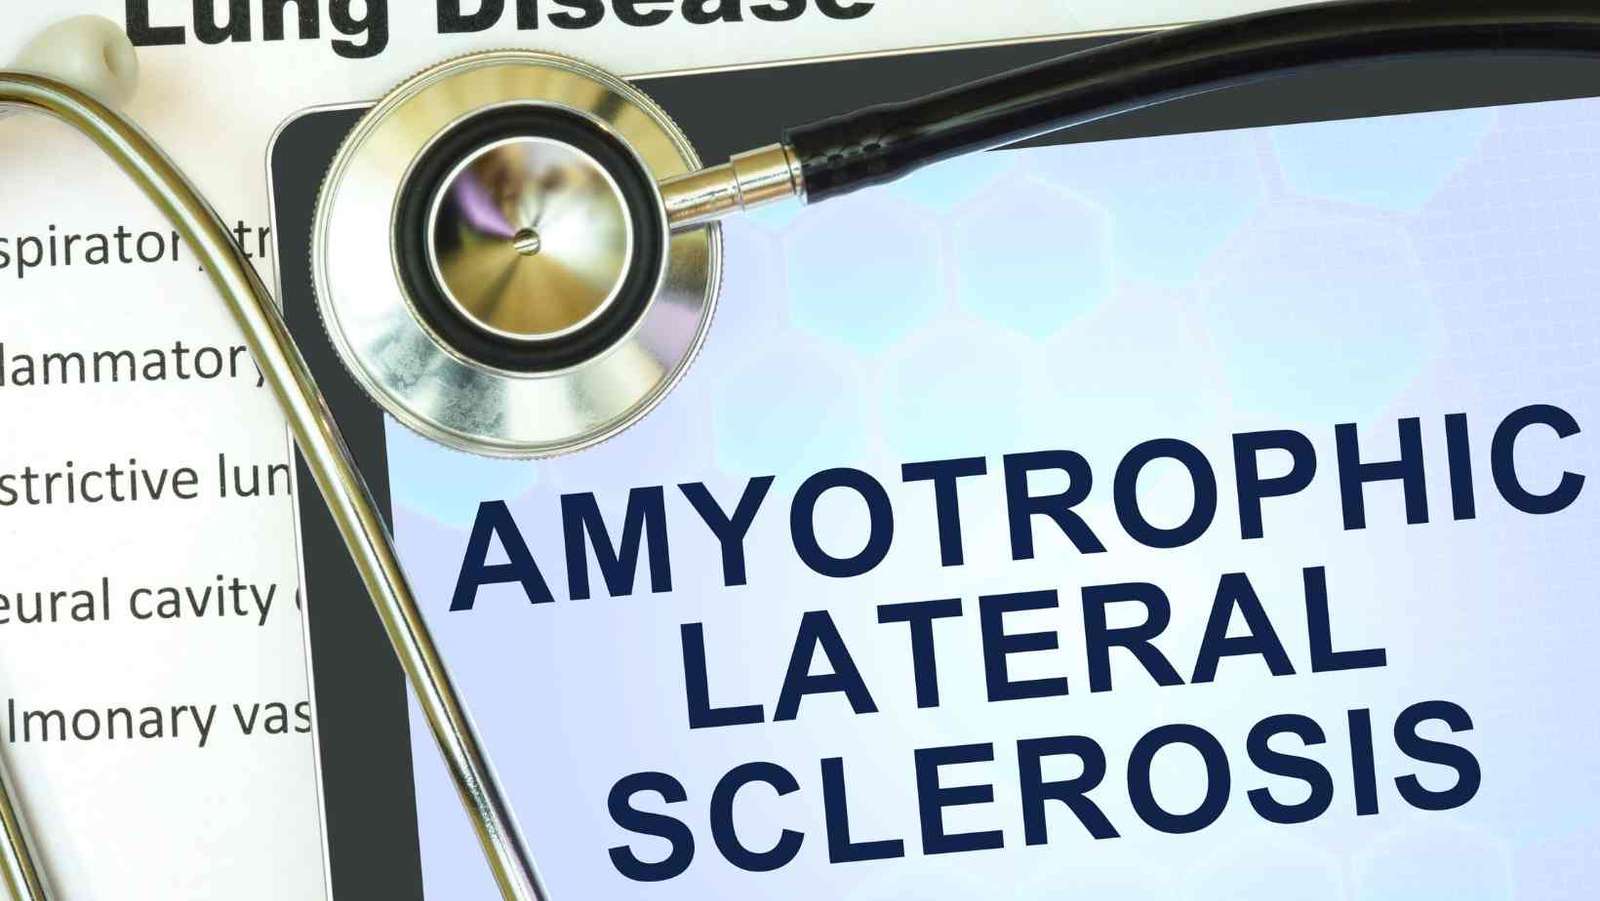 amyotrophic lateral sclerosis symptoms